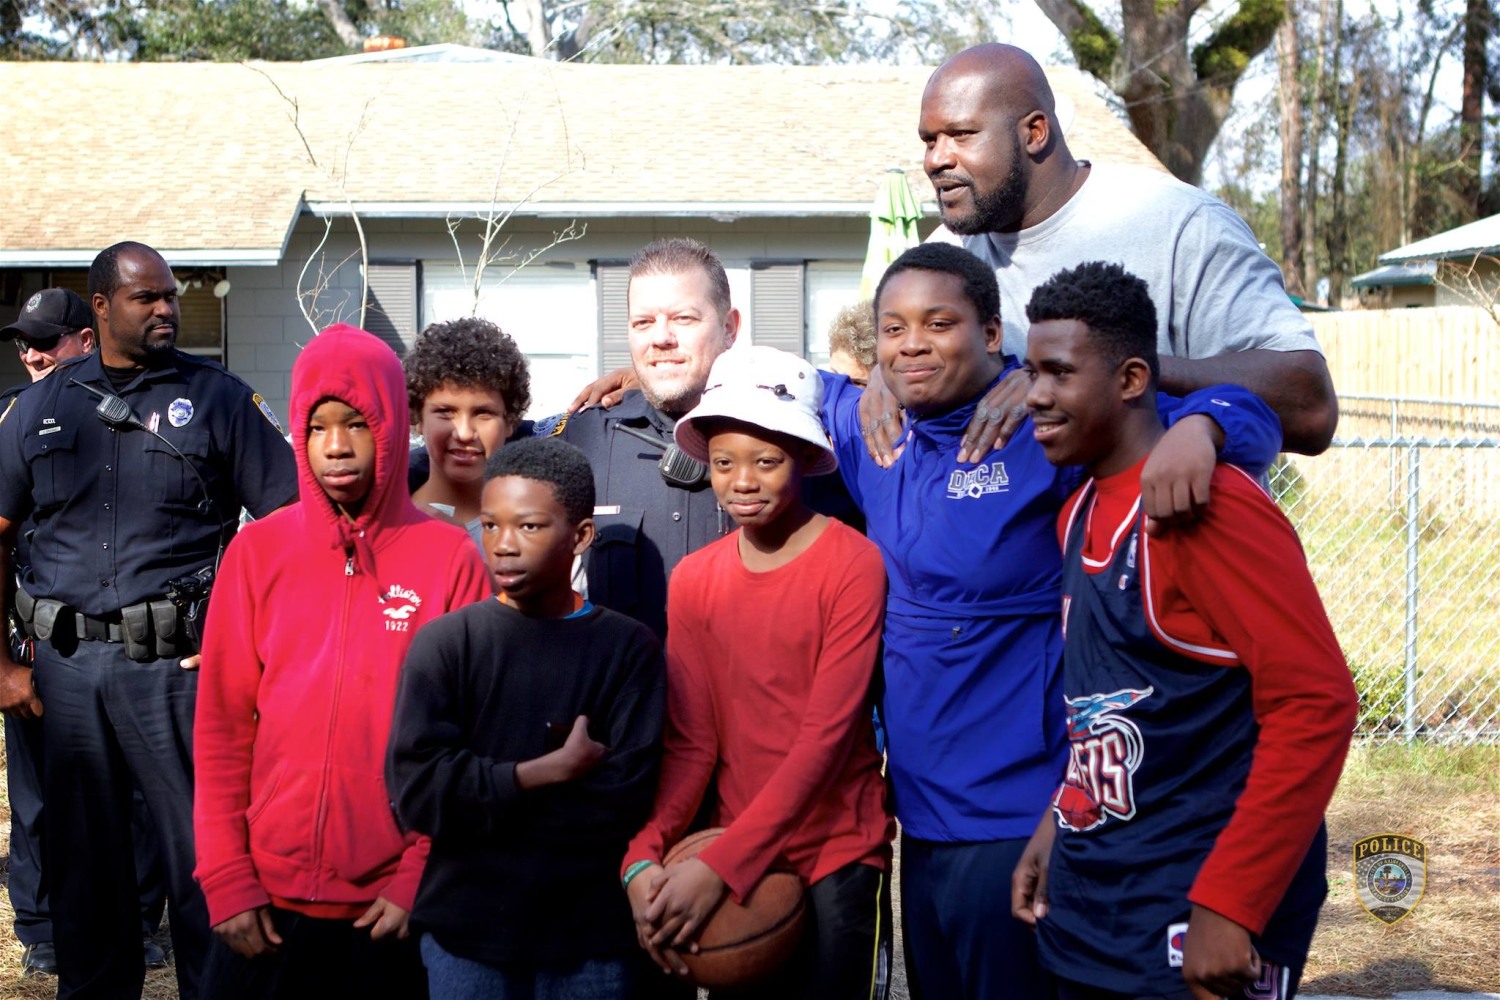 Shaq Surprises Florida Cop for Pickup Game With Kids After Viral Hoops Video - NBC News1501 x 1000